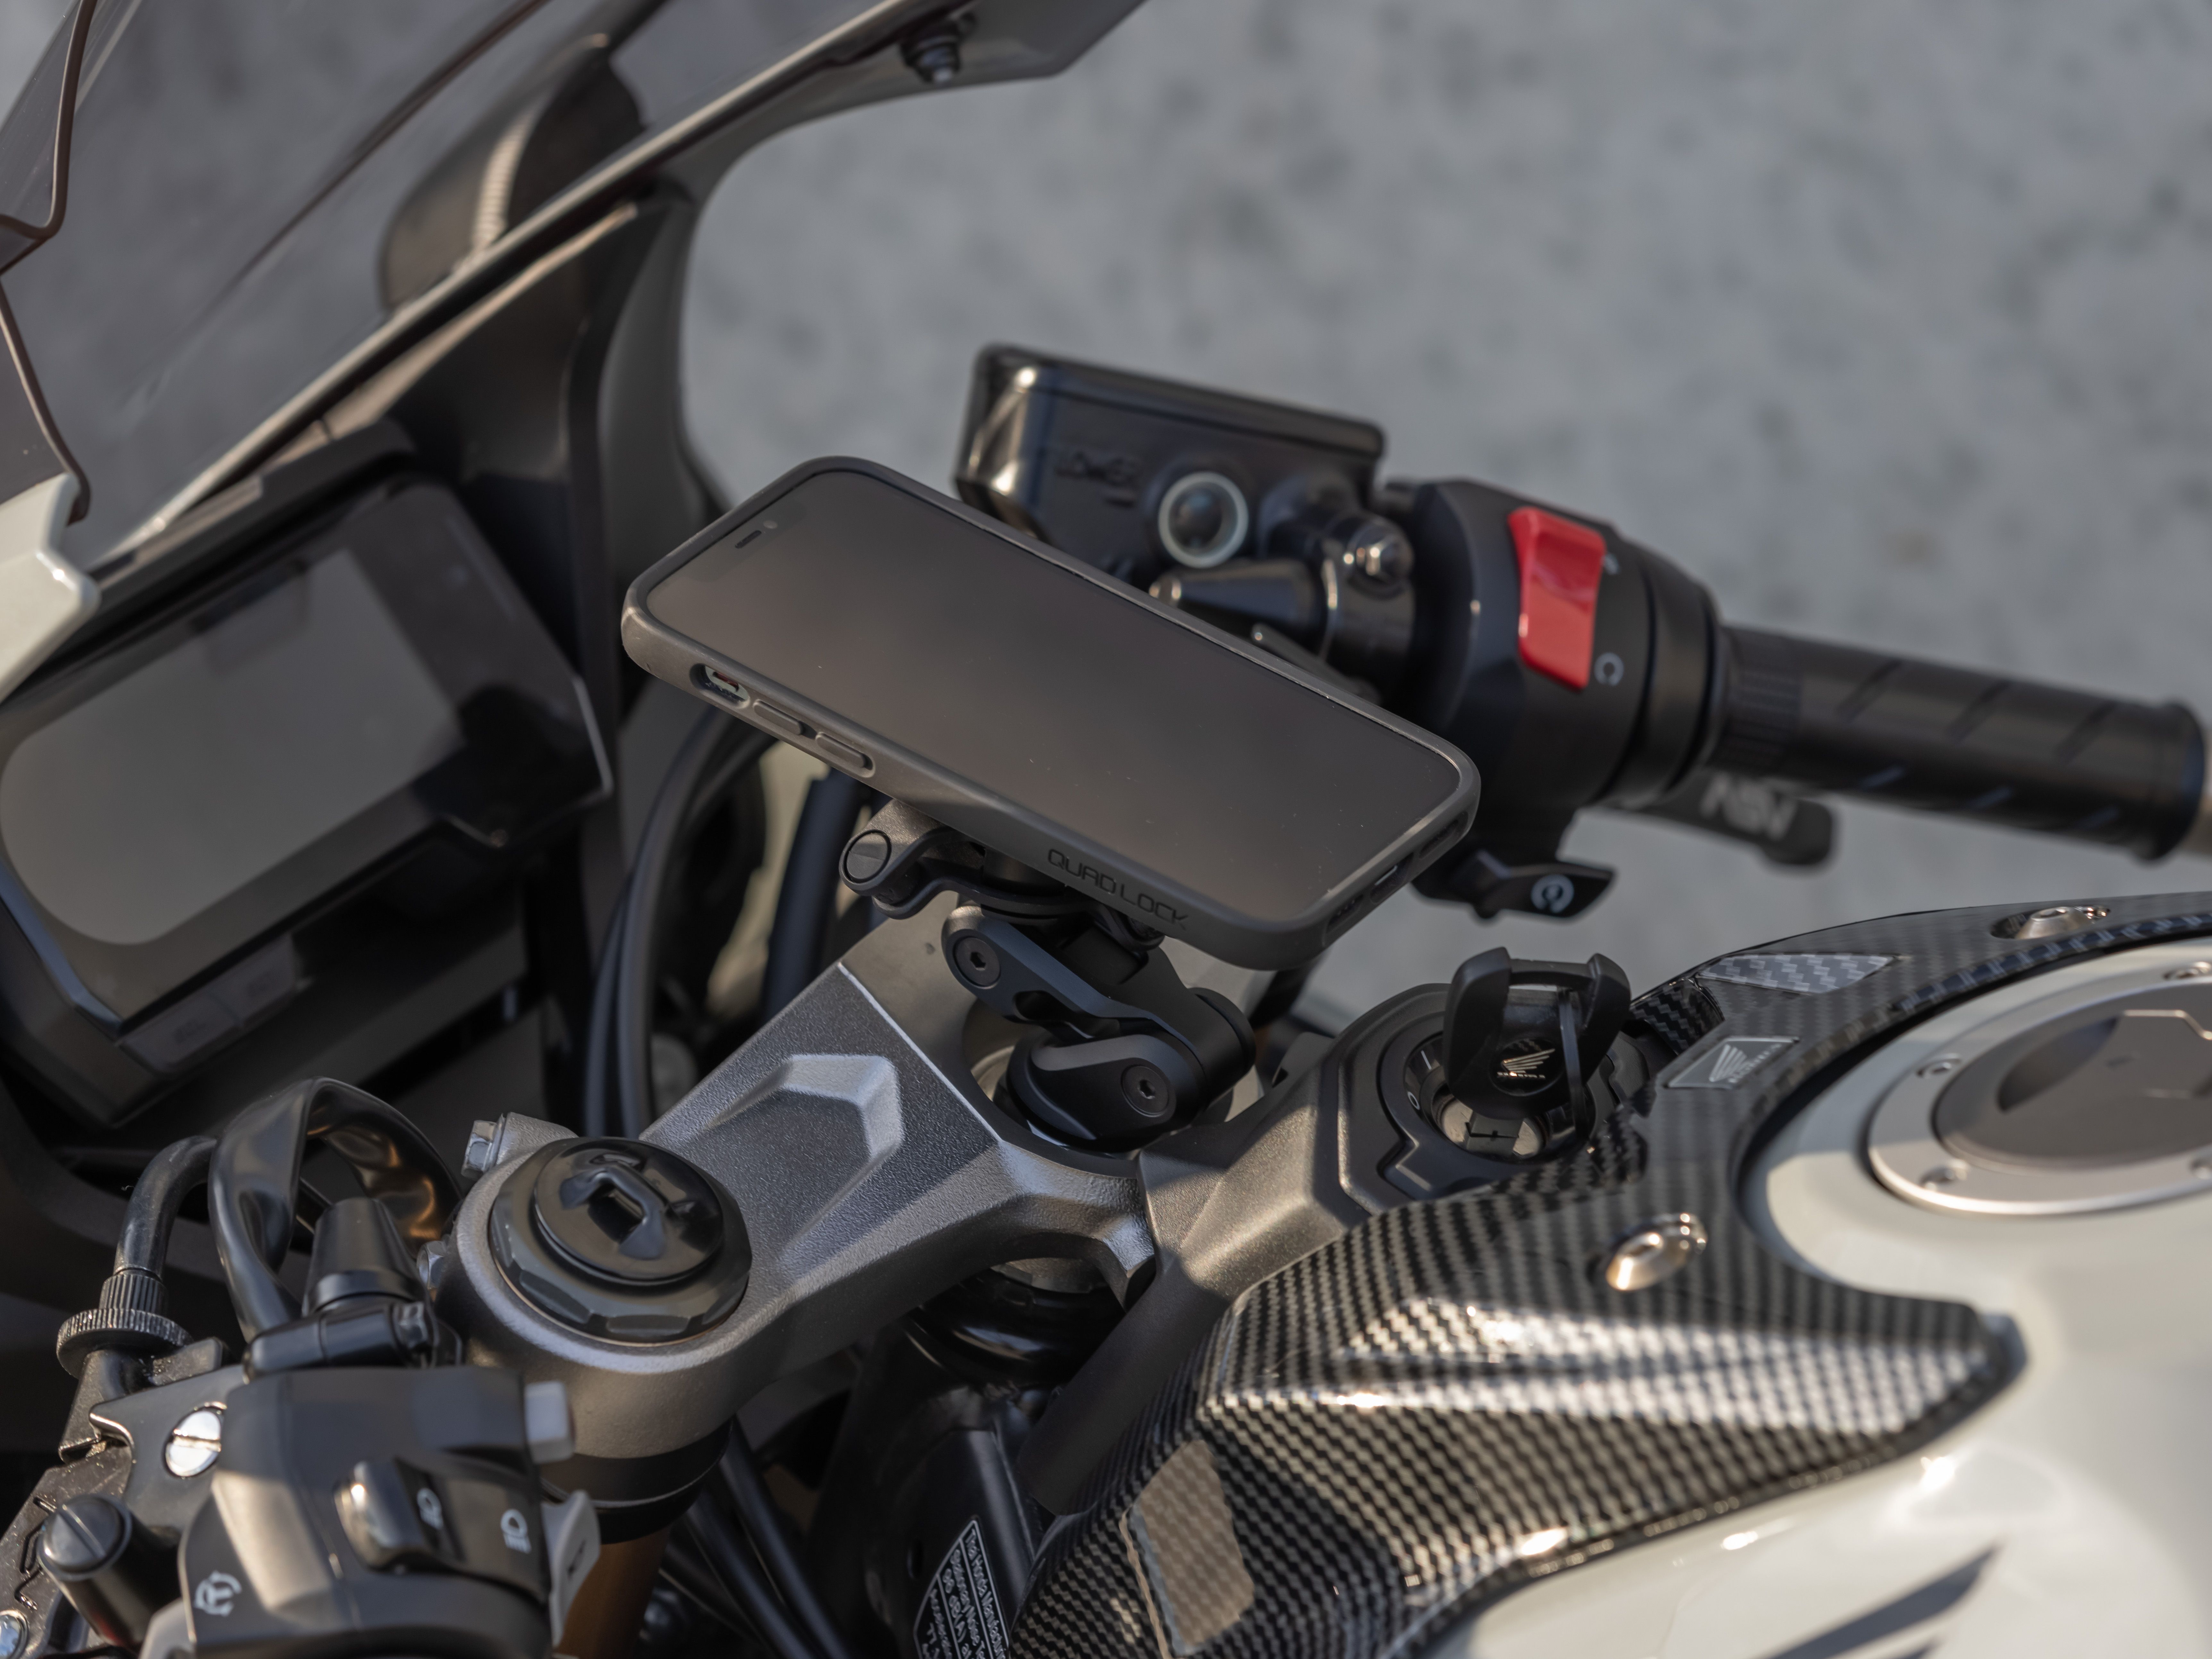  Quad Lock Motorcycle Fork Stem Mount for iPhone and Samsung  Galaxy Phones : Automotive